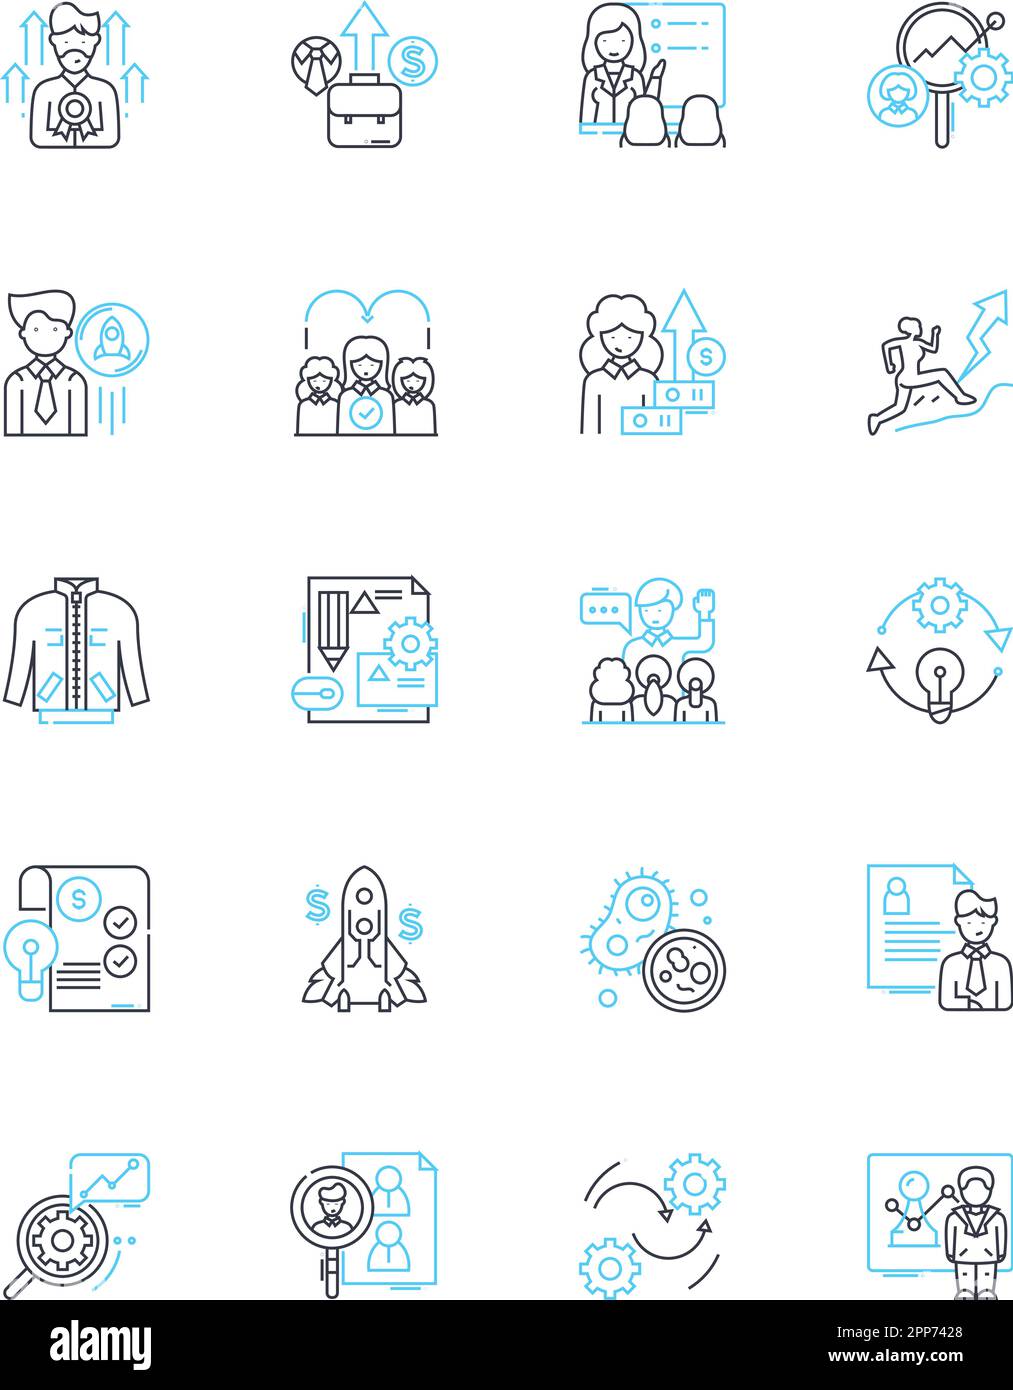 Candidate Selection linear icons set. Qualifications, Experience, Interviews, Assessments, Skills, Background, Education line vector and concept signs Stock Vector